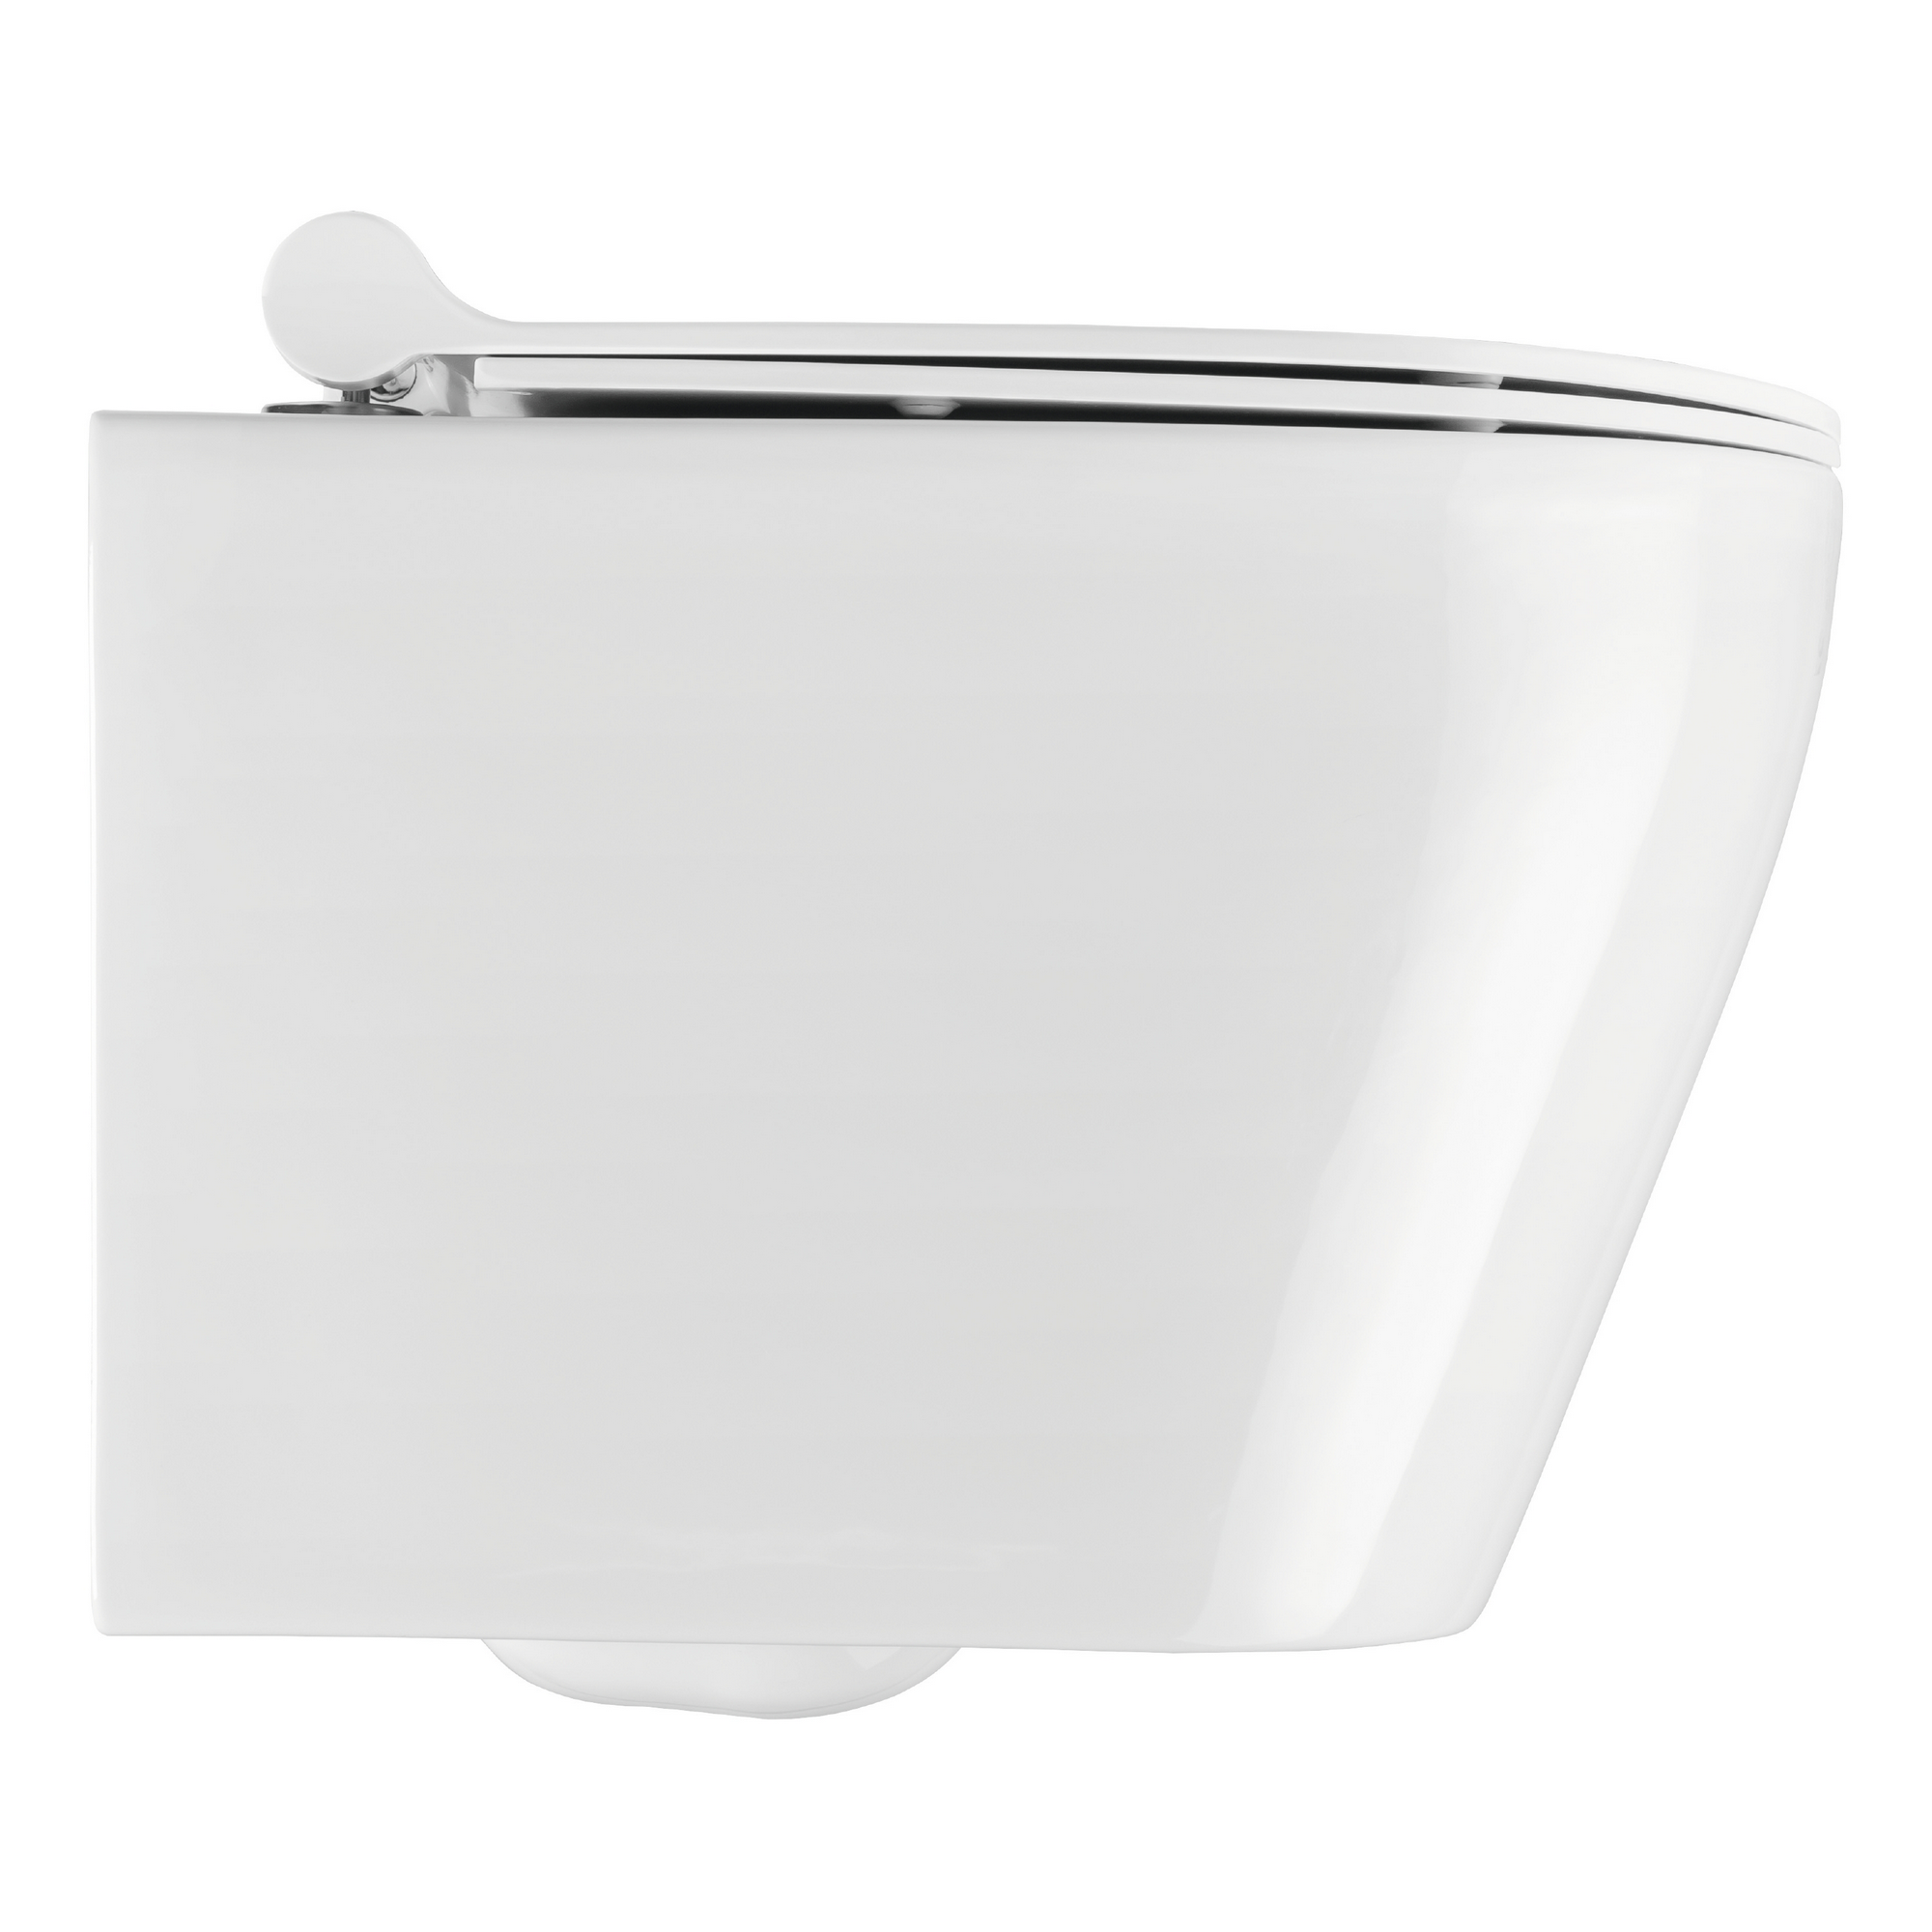 Wand-WC-Set 'Sanremo' weiß 36 x 36 x 48 cm + product picture